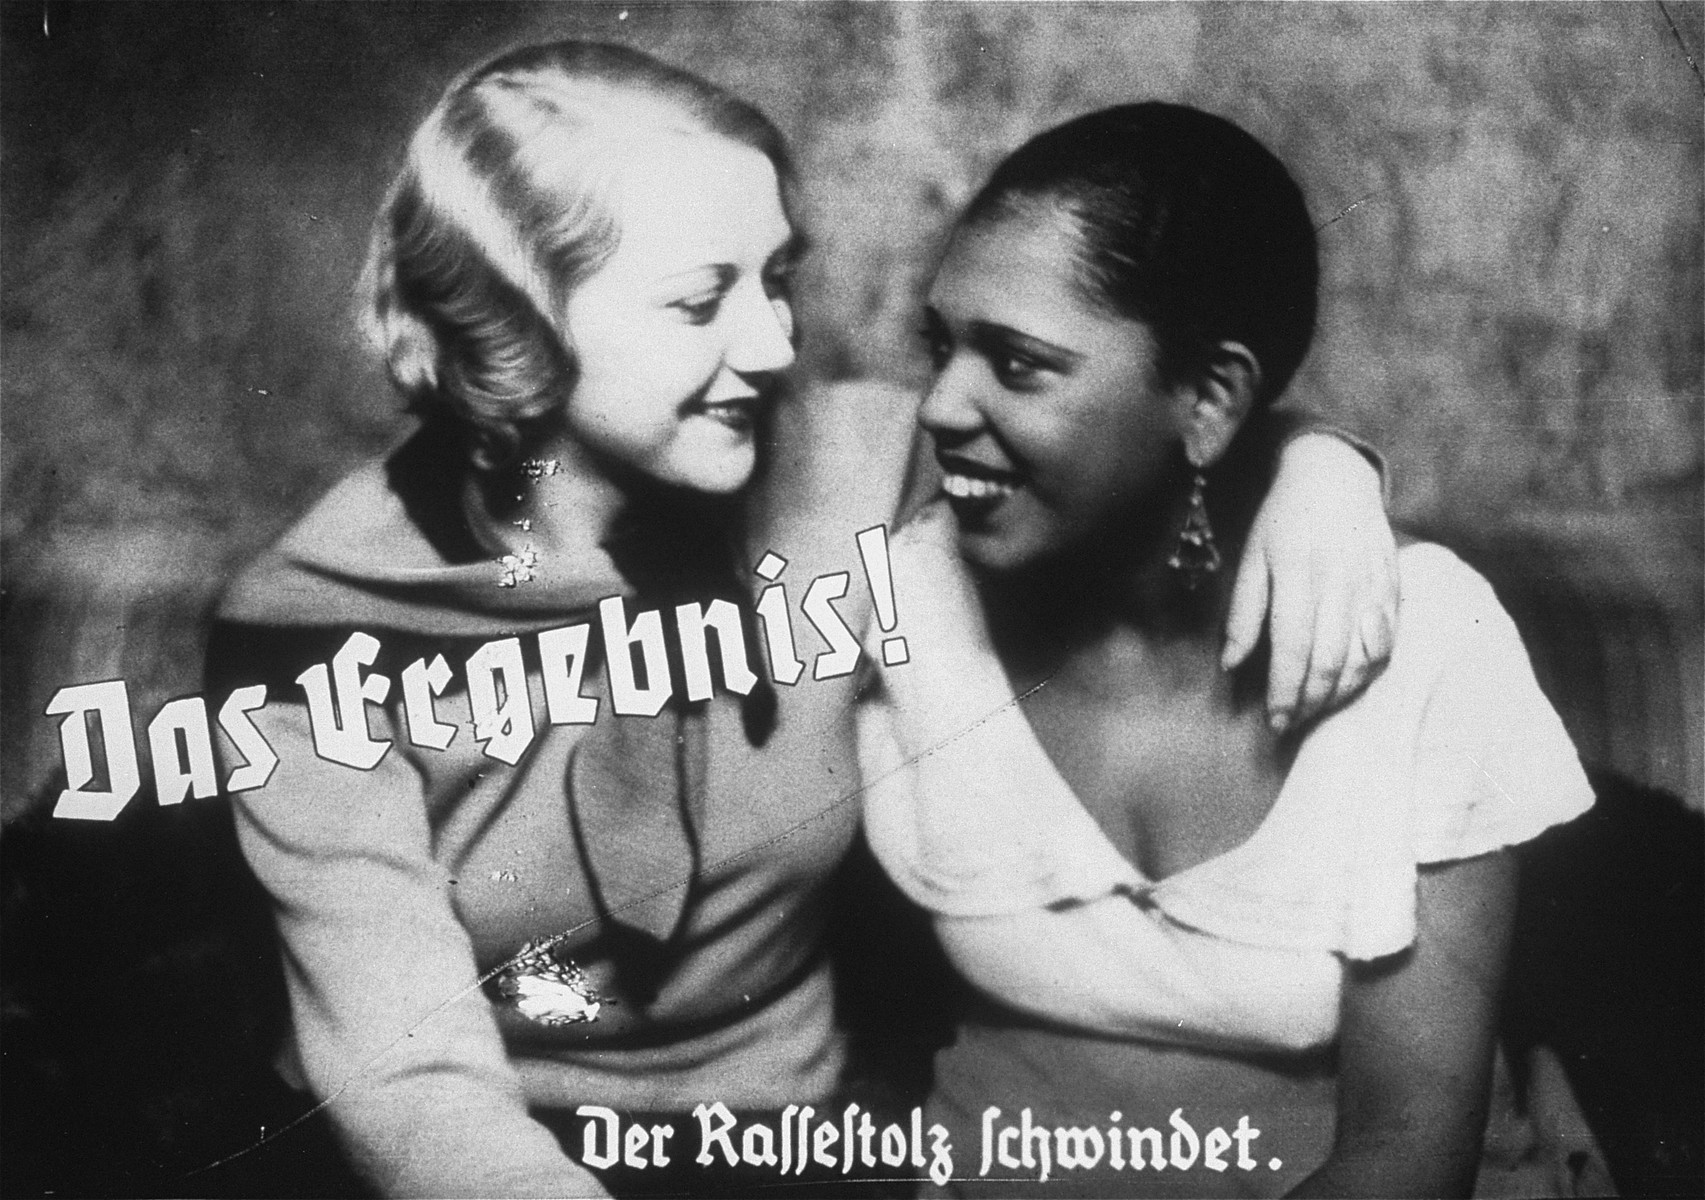 Propaganda slide depicting friendship between an Aryan woman and a Black woman as a loss of racial pride.  The caption reads, "The result/Racial pride fades."